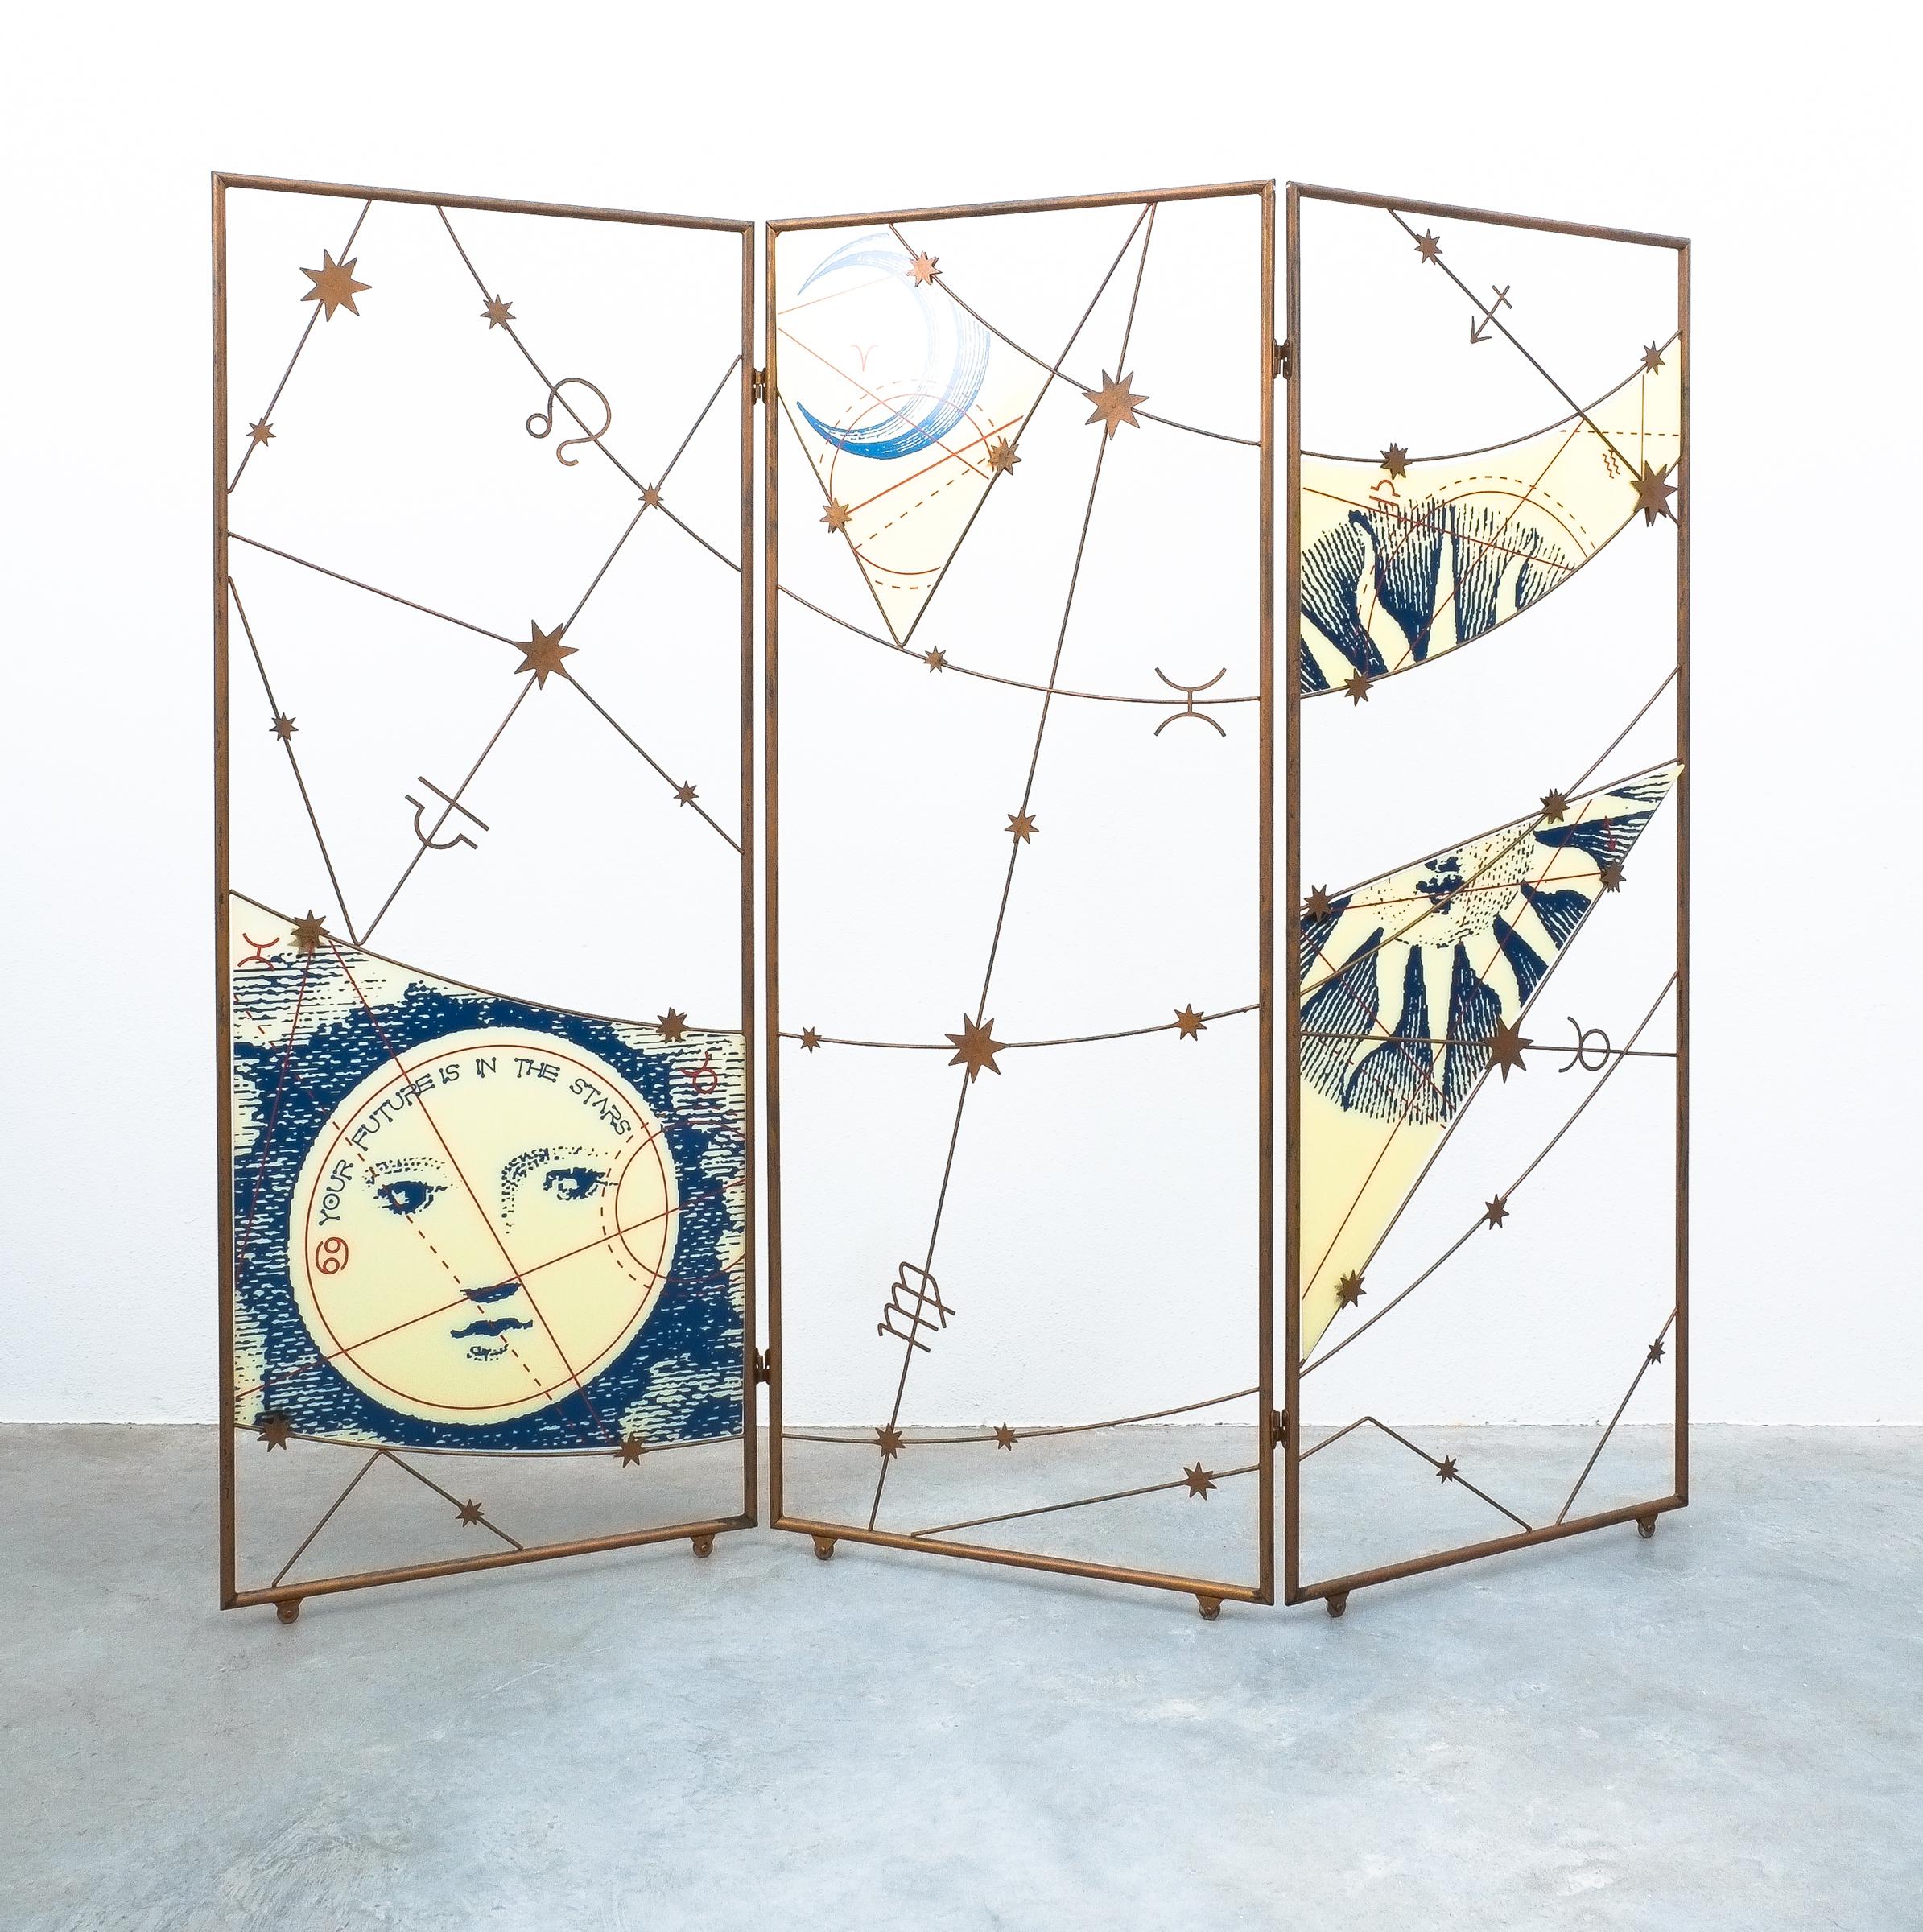 Room divider screen Paravant, Italy, circa 1955

This very large screen in the style of Fornasetti has been handmade from iron and screen-printed Lucite. It moves on customized casters and is in very good condition. Measurements are 96